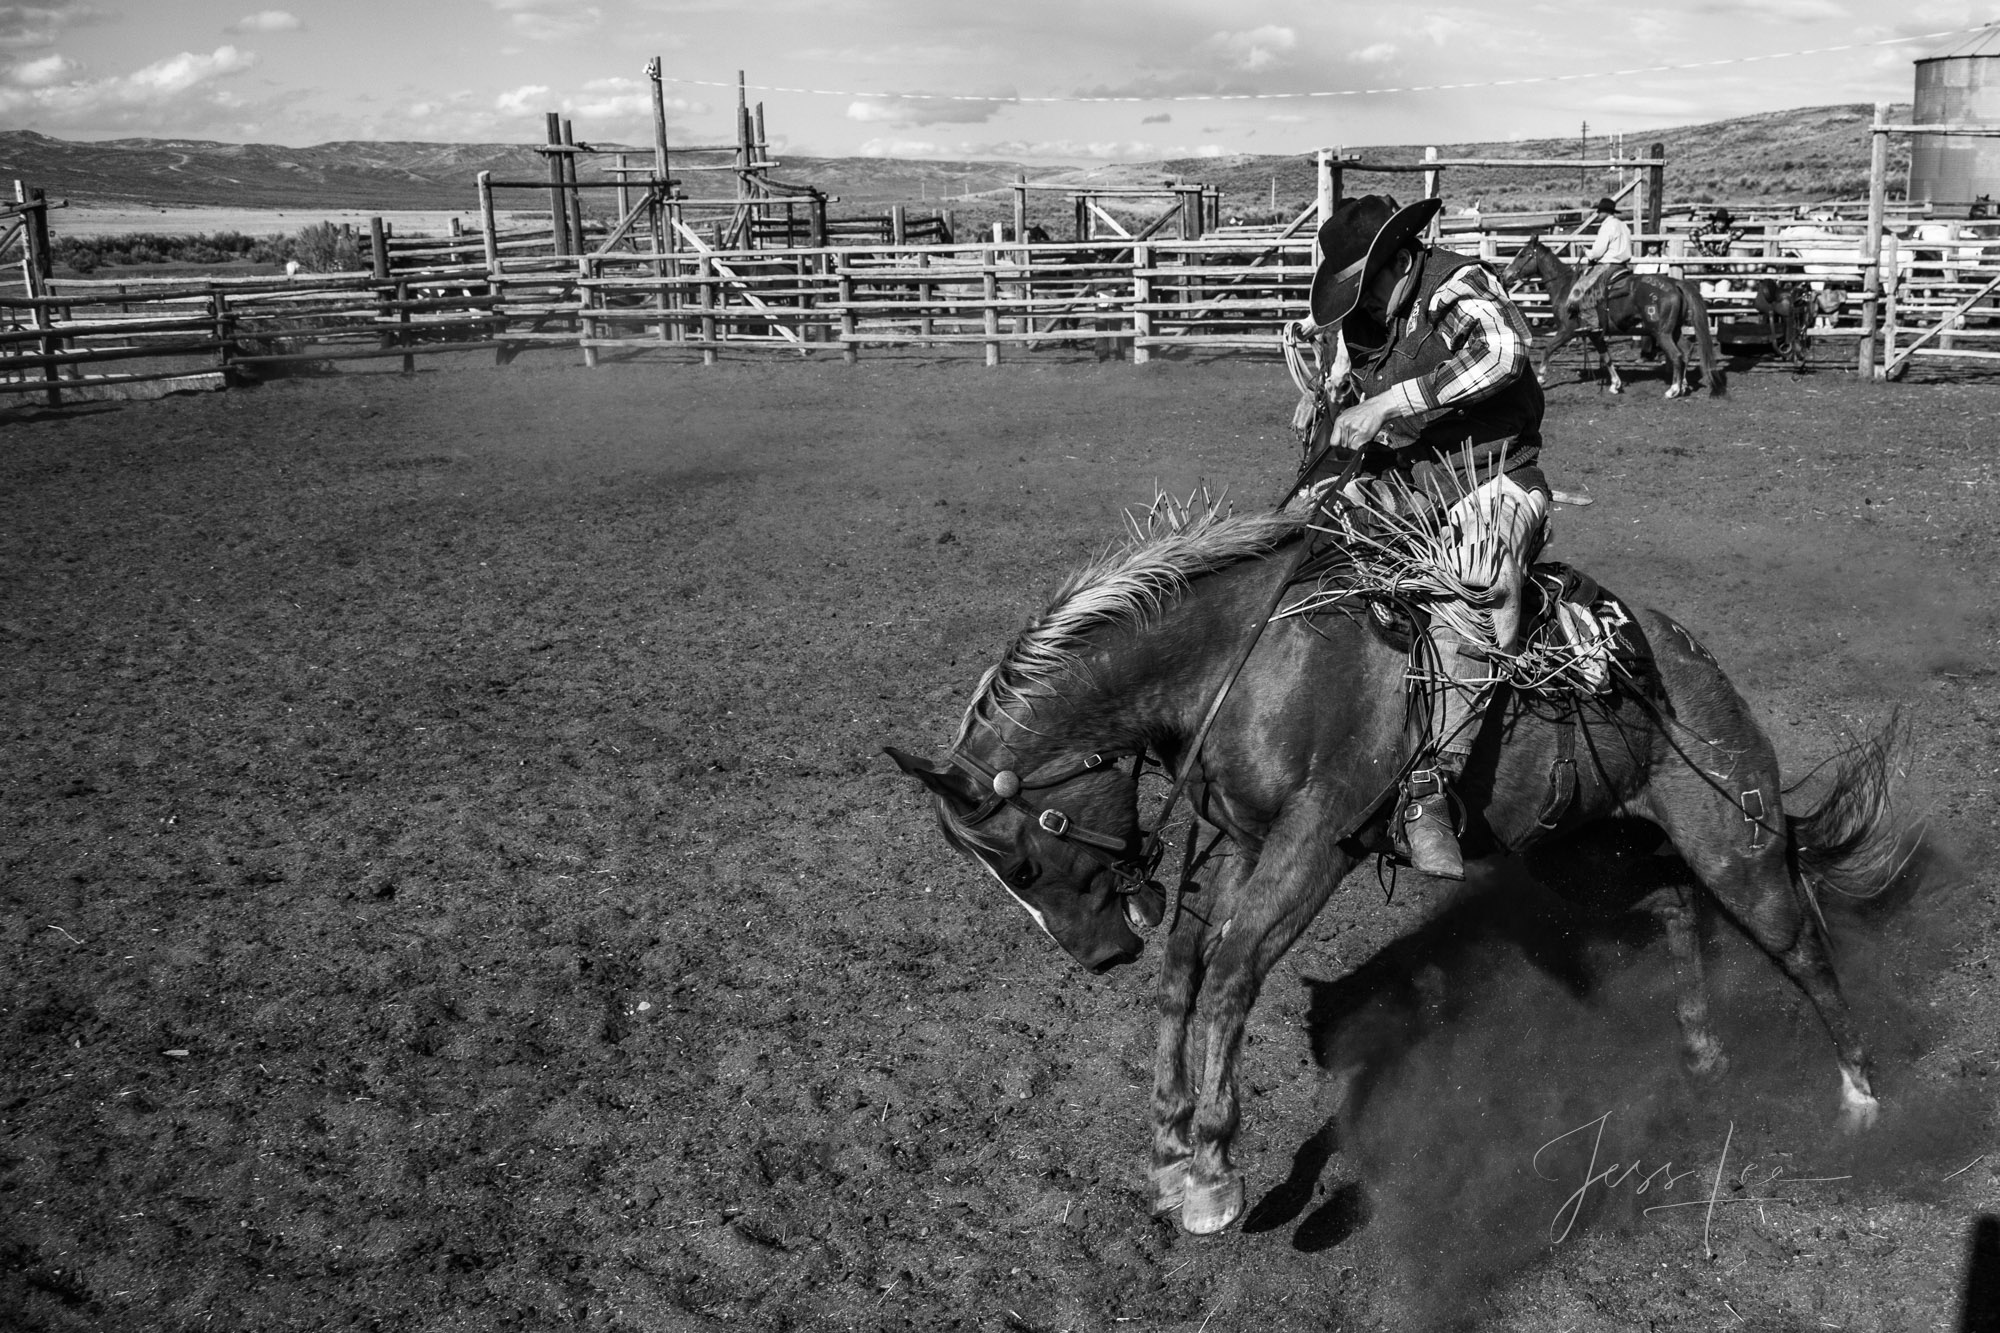 Fine Art Limited Edition Photo Prints of Cowboys, Horses, and life in the West. Hang in there. A Cowboy picture in black and...